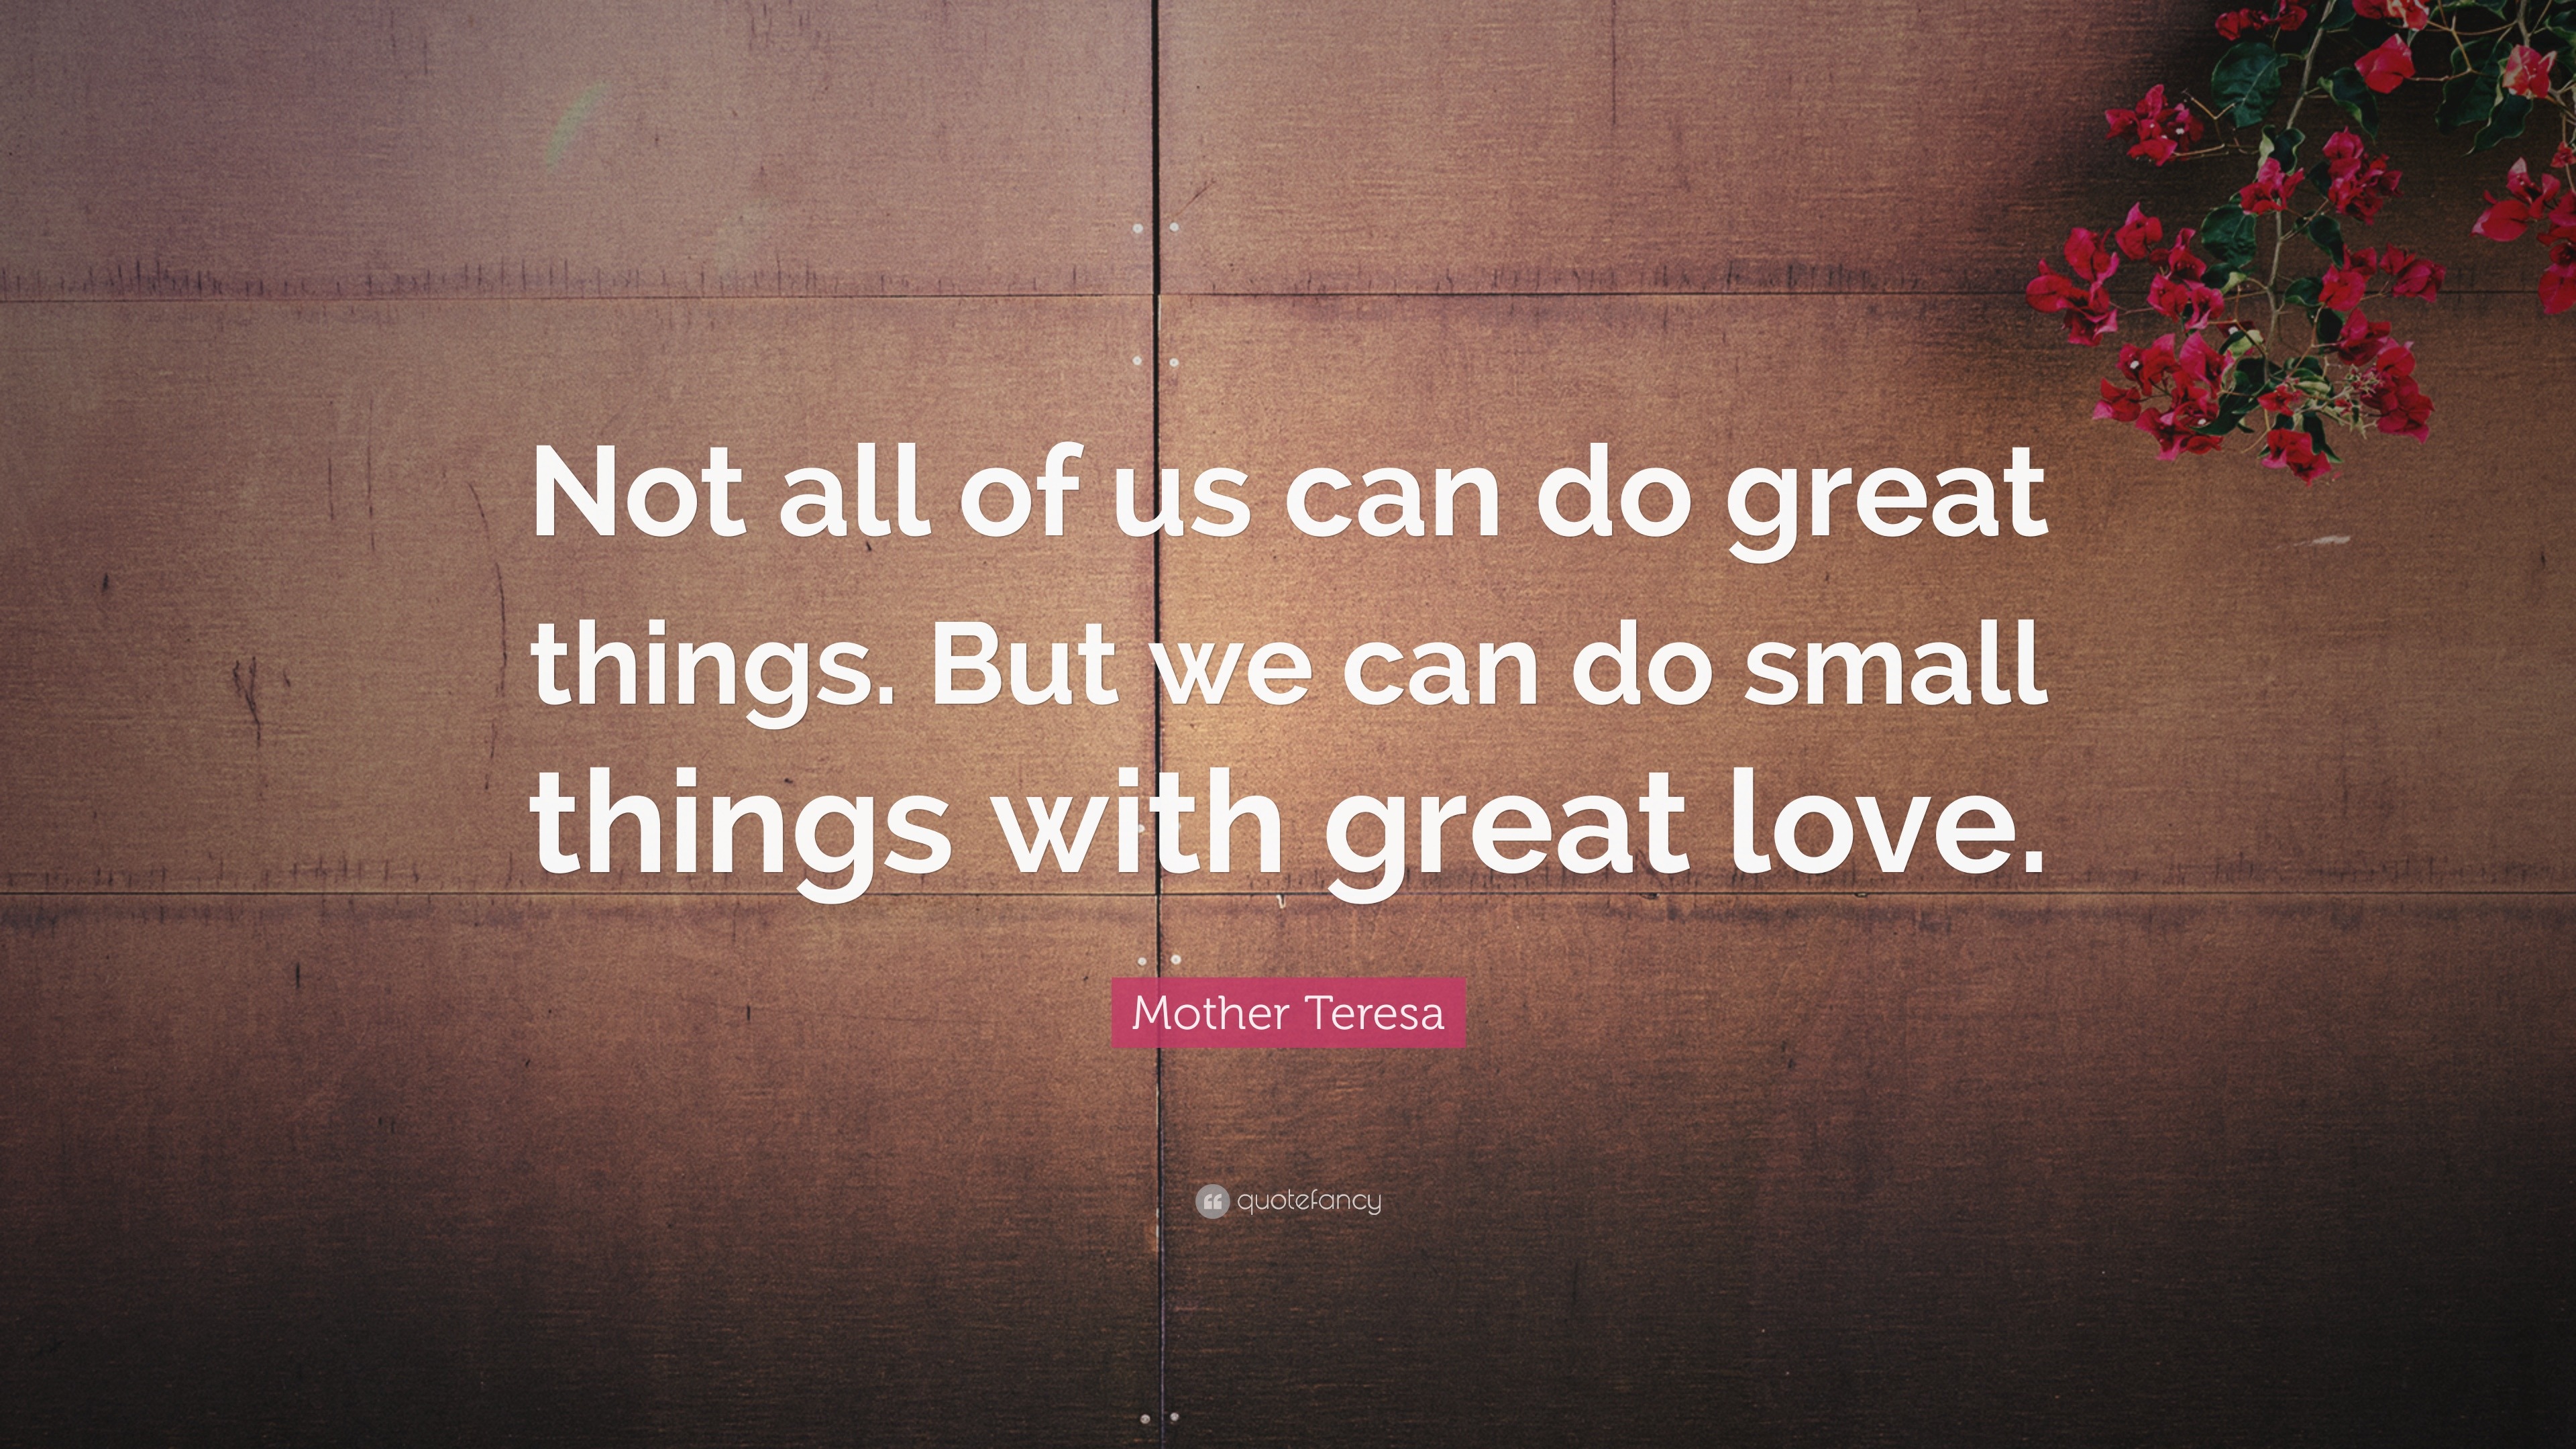 Mother Teresa Quote: “Not all of us can do great things. But we can do